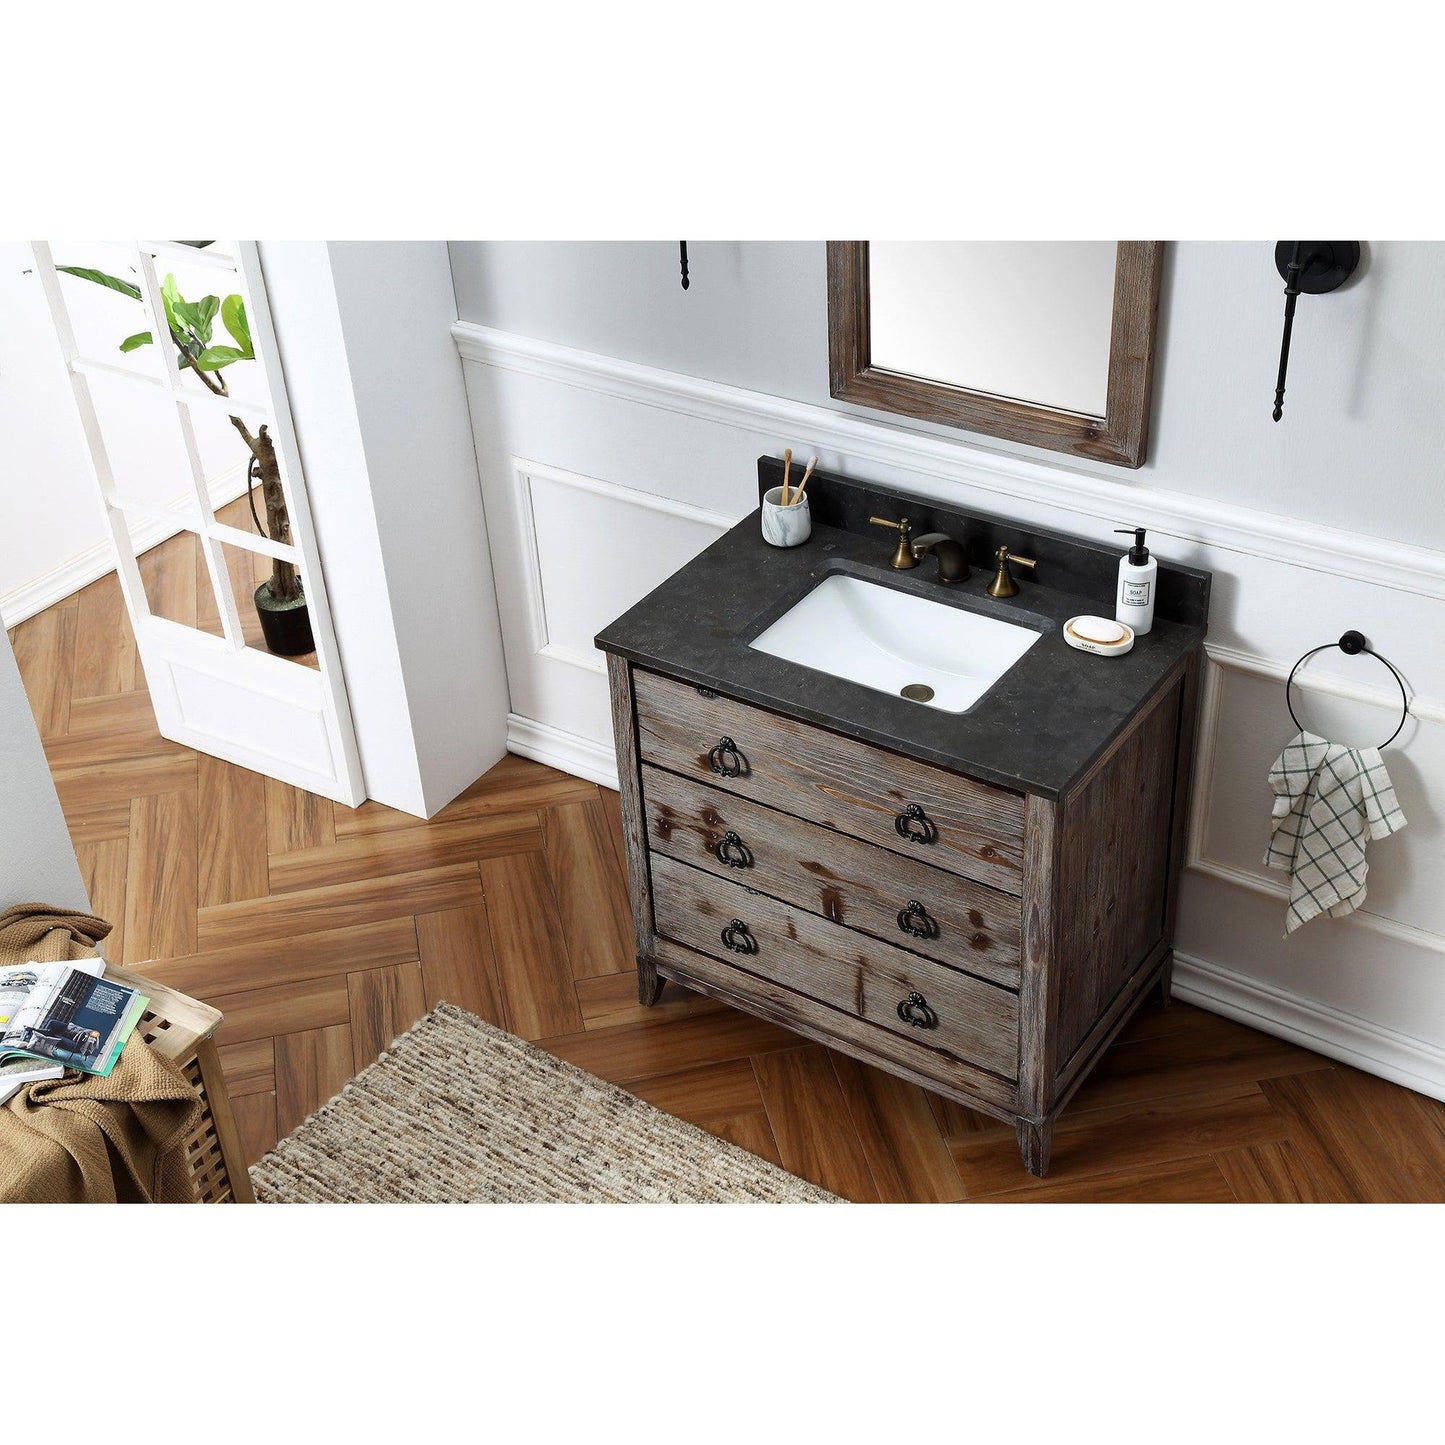 Legion Furniture WH8836 36" Brown Rustic Freestanding Vanity With Moon Stone Marble Top, Backsplash and White Ceramic Sink